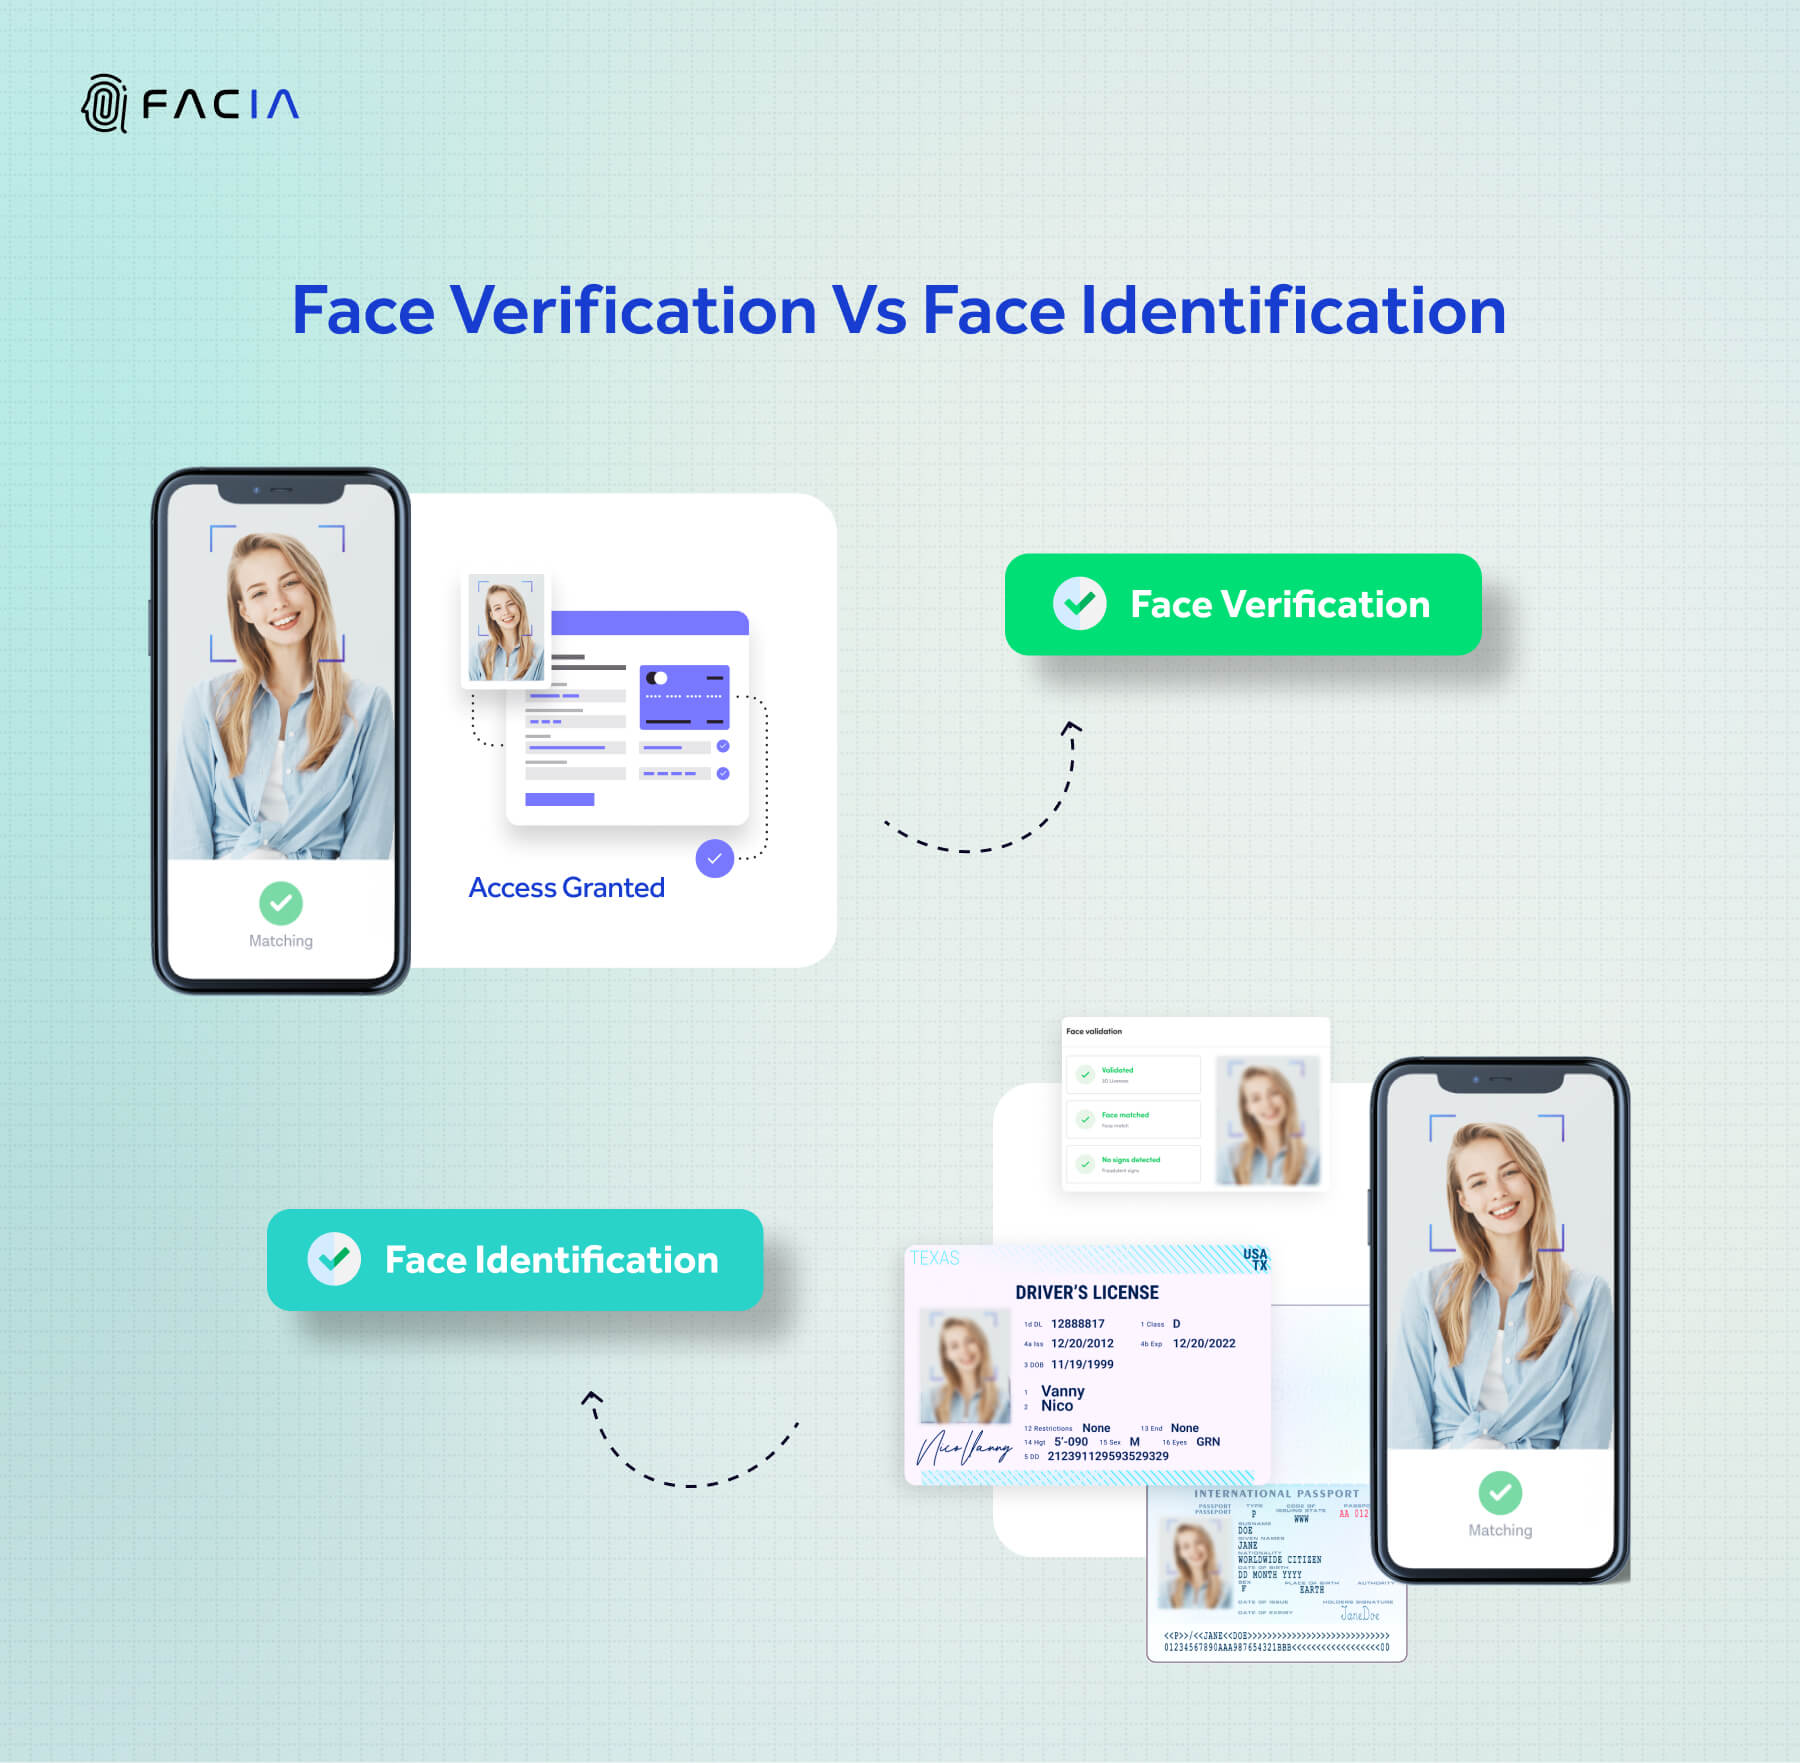 The image explains the difference between face verification & identification, showing that successful verification grants access, while identification shows matching results.